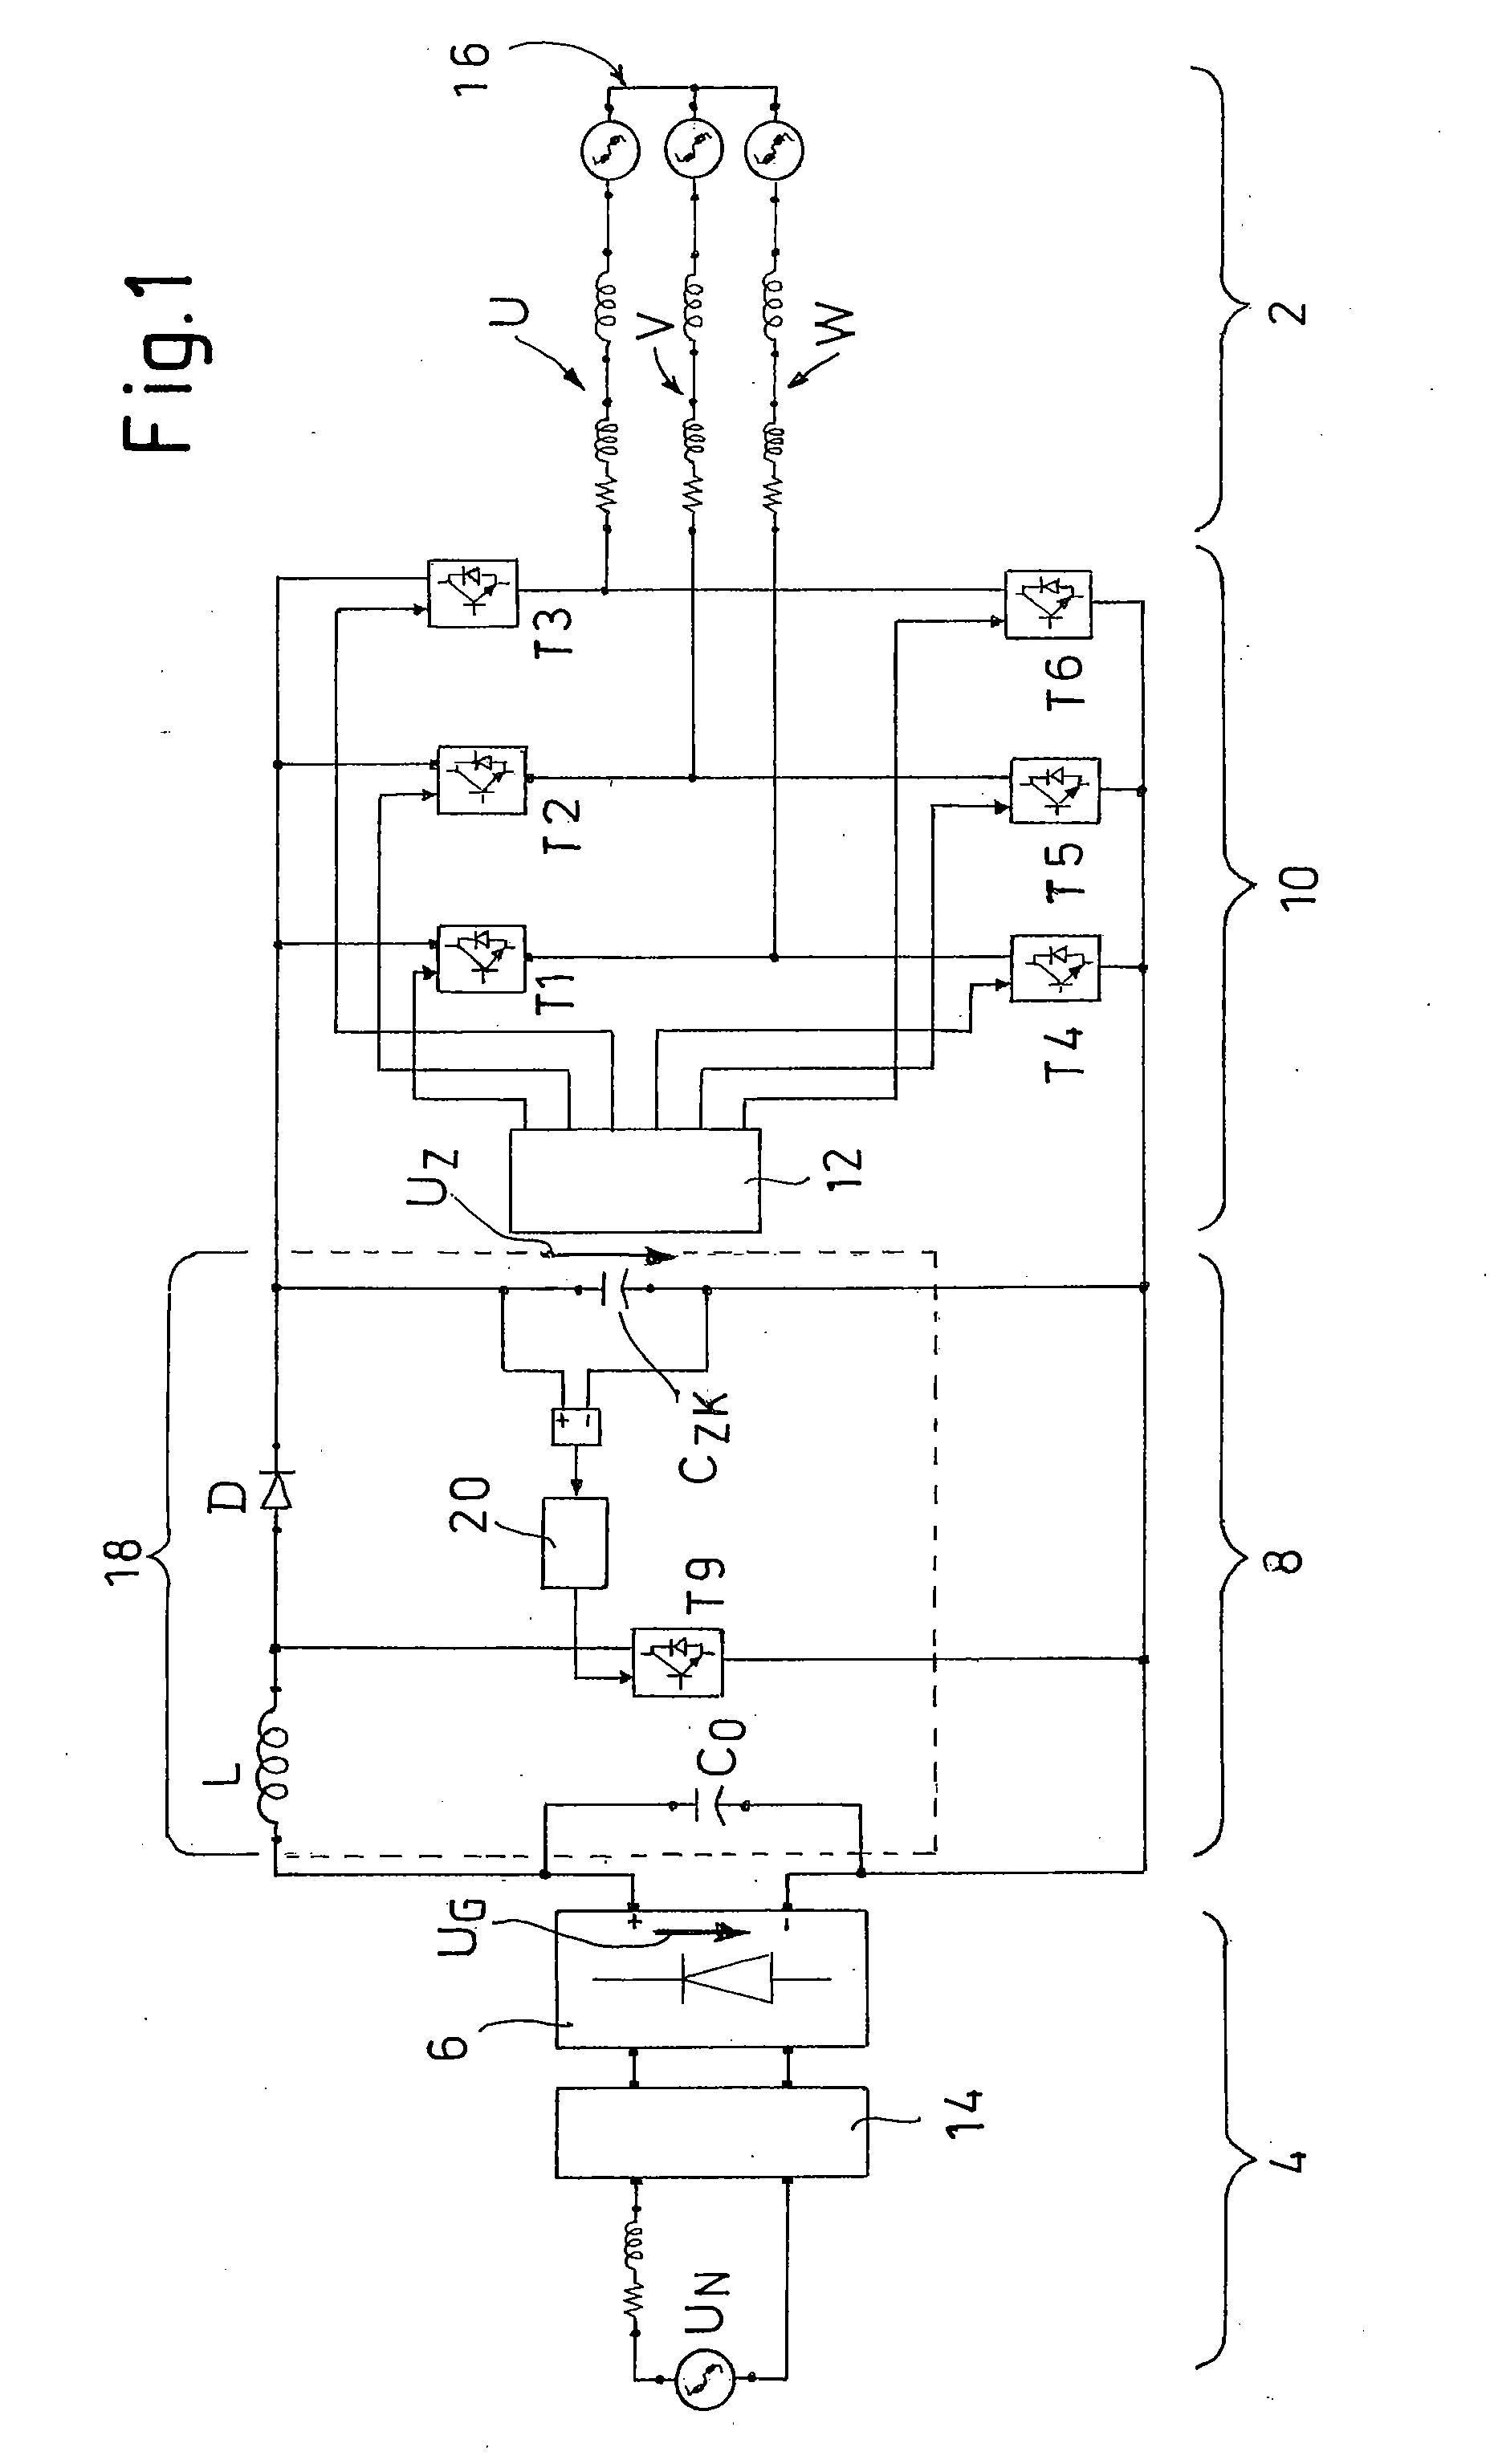 Procedures and Control System to Control a Brushless Electric Motor